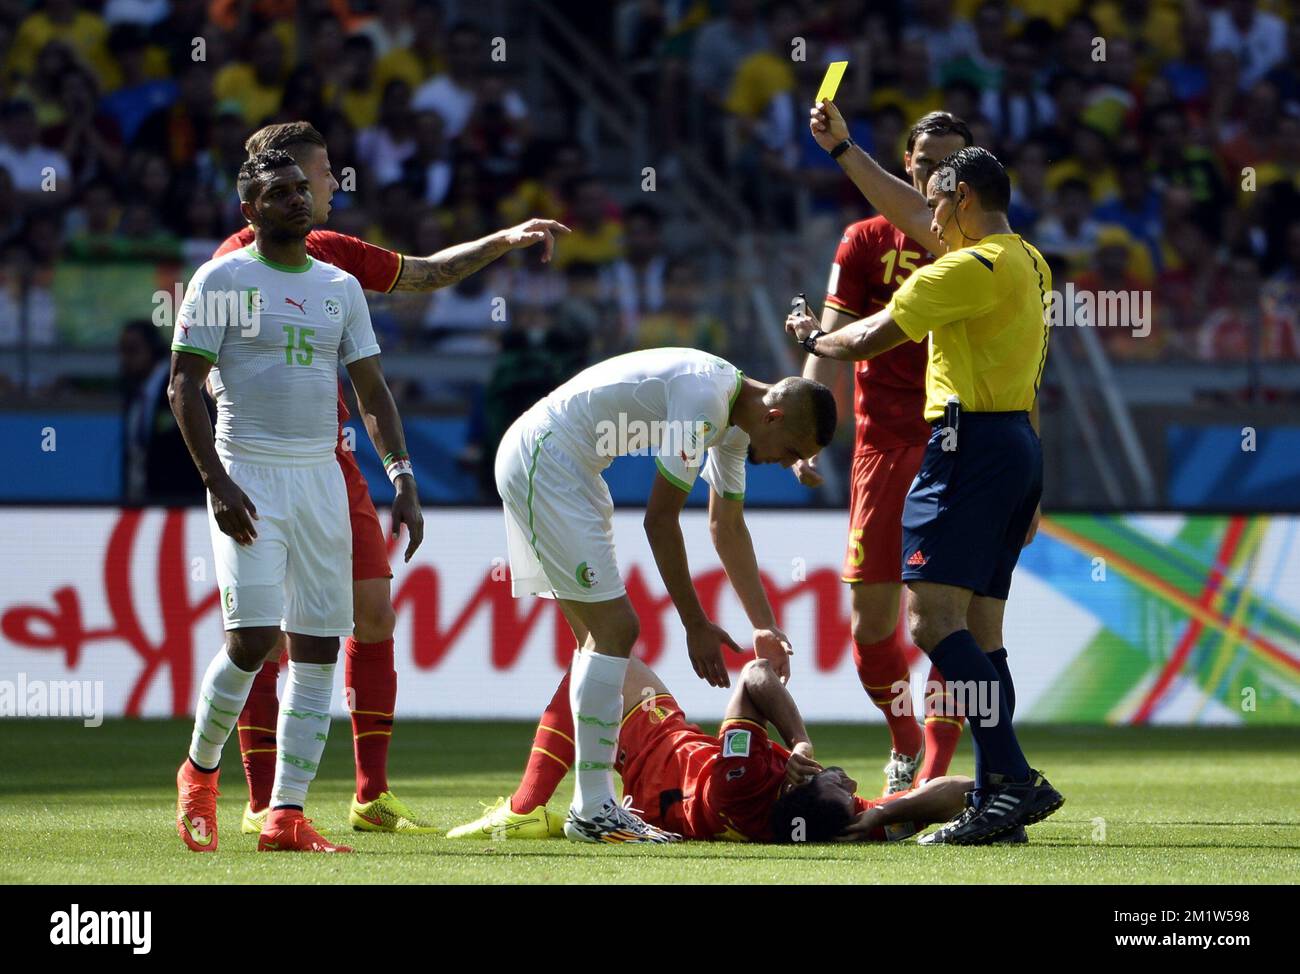 Belgium's Moussa Dembele lay down next to, referee Marco Rodriguez, Belgium's Daniel Van Buyten (R) and Algeria's El Arbi Hillel Soudani (L) at a soccer game between Belgian national team The Red Devils and Algeria in Belo Horizonte, Brazil, the first game in Group H of the first round of the 2014 FIFA World Cup, Tuesday 17 June 2014.  Stock Photo